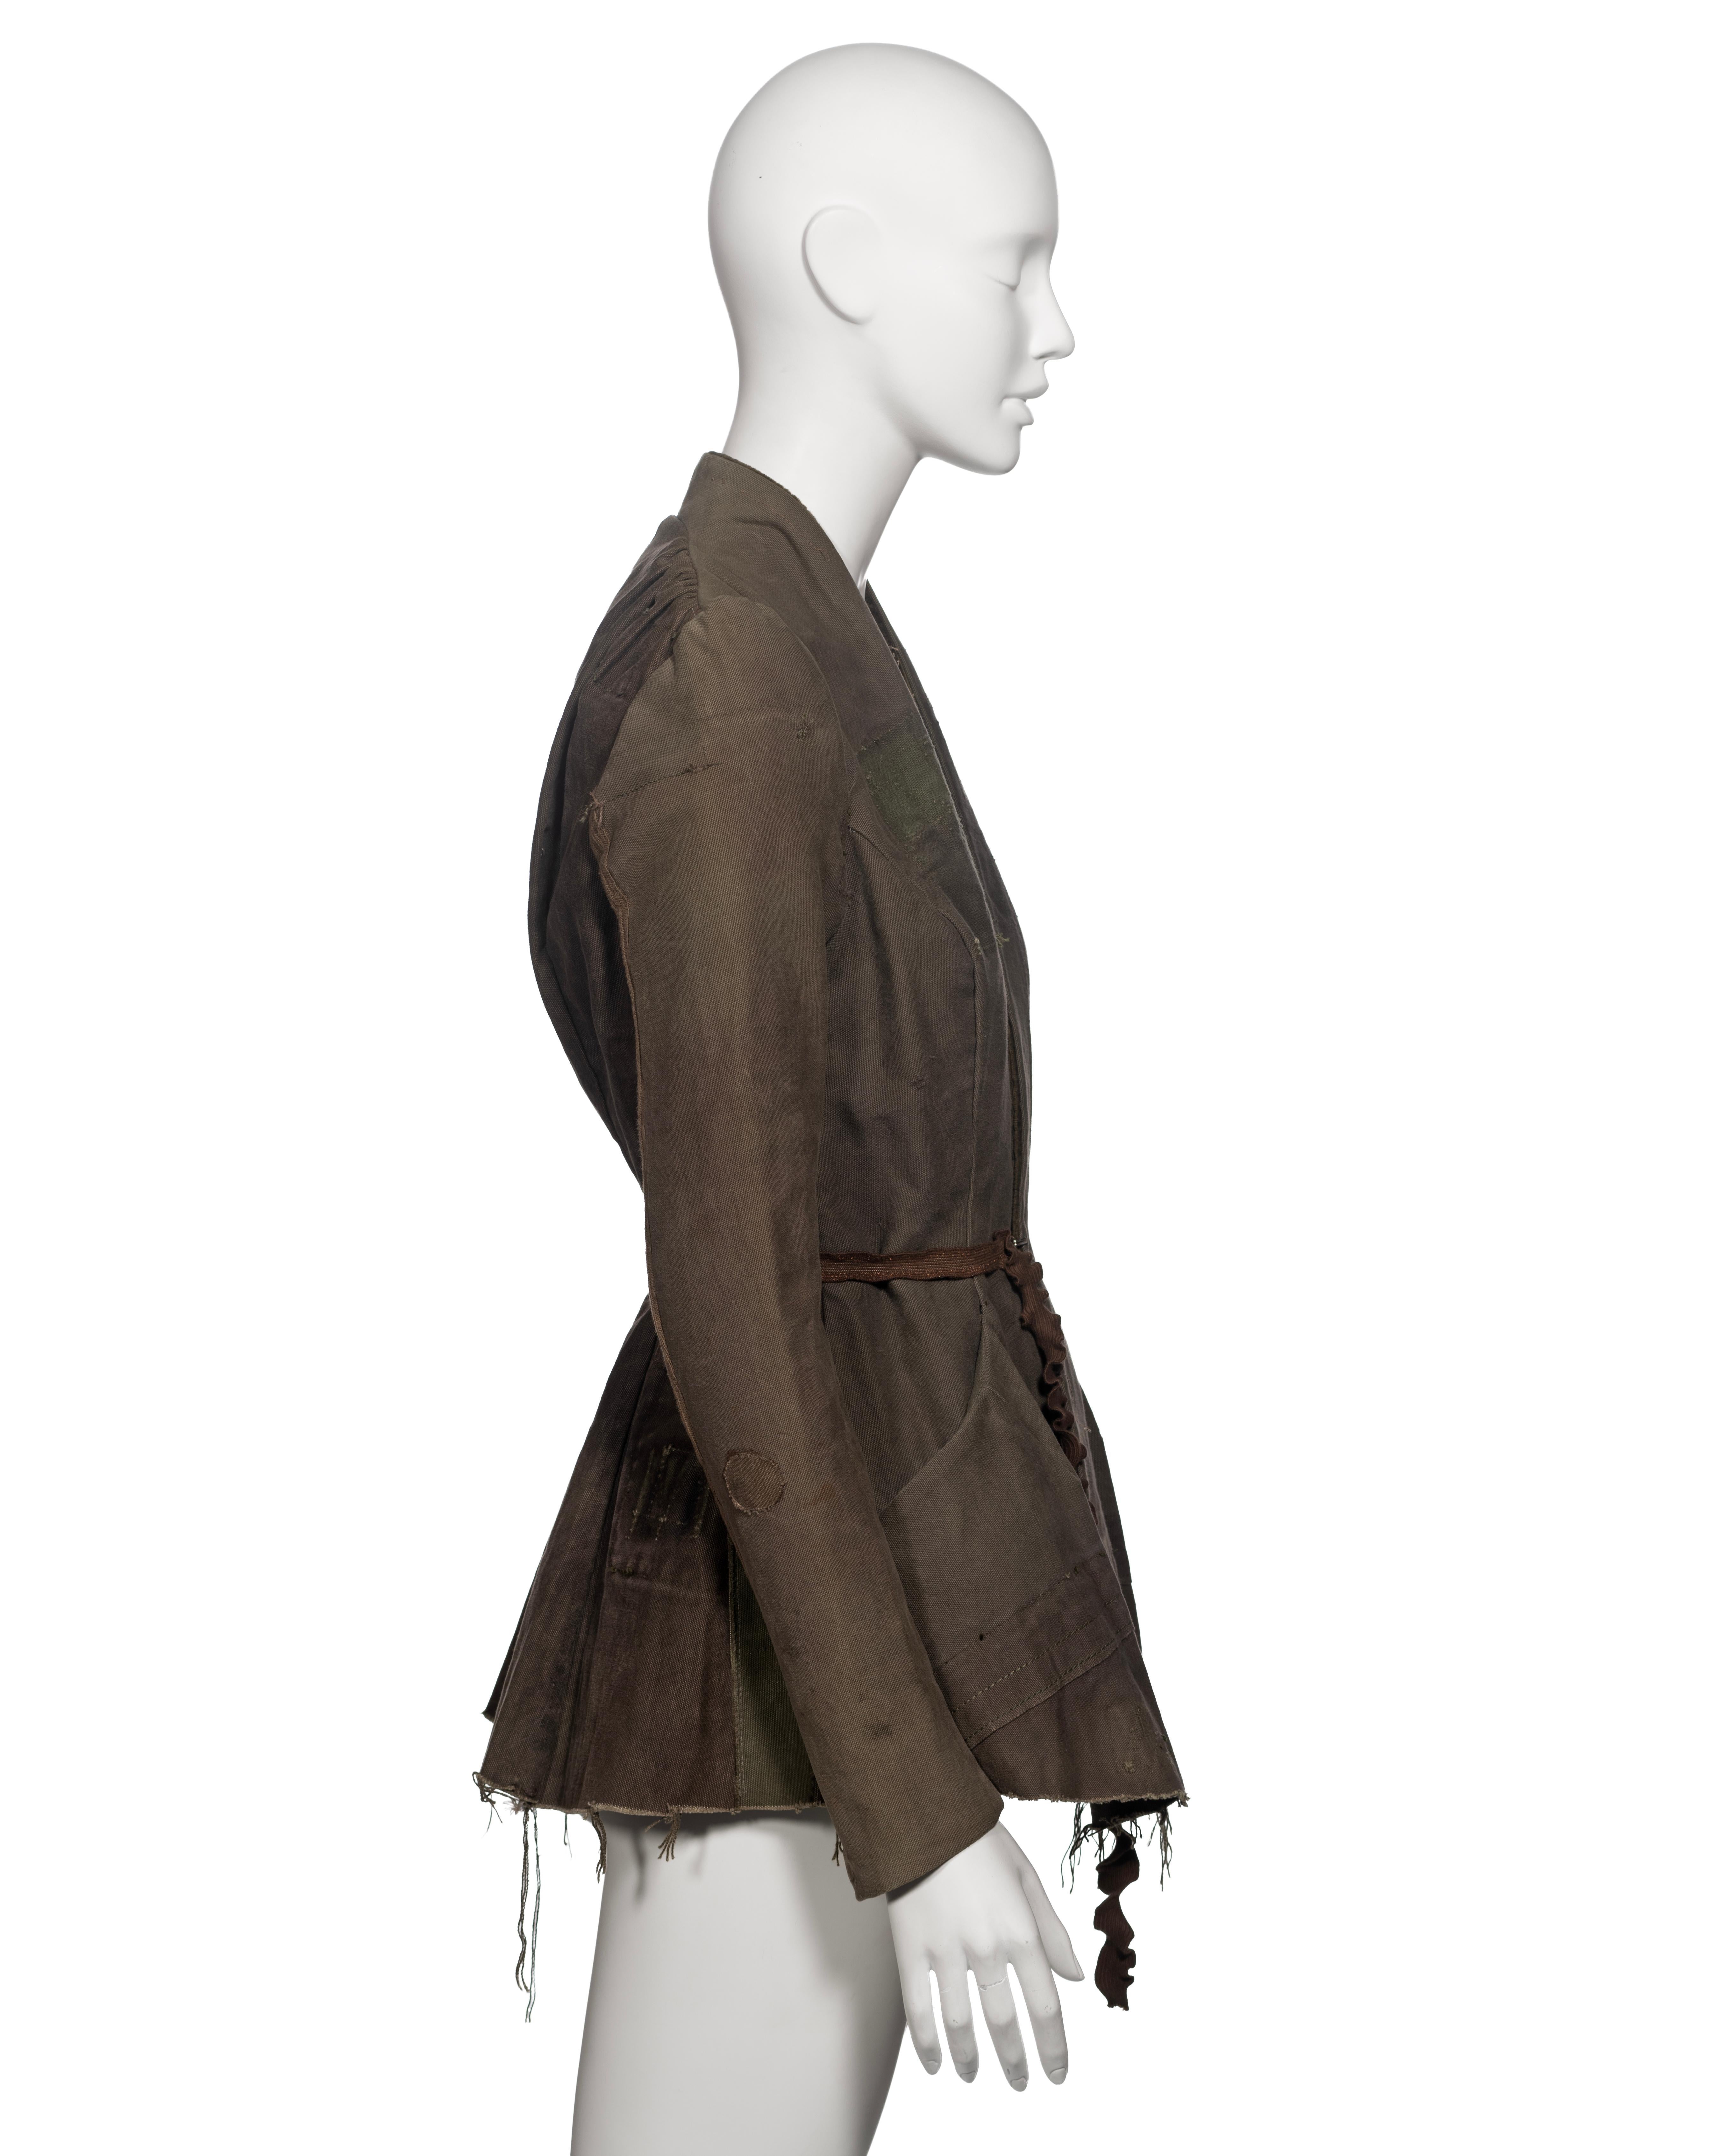 Rick Owens Jacket Made From Deconstructed Military Surplus Bags, c. 1998 3